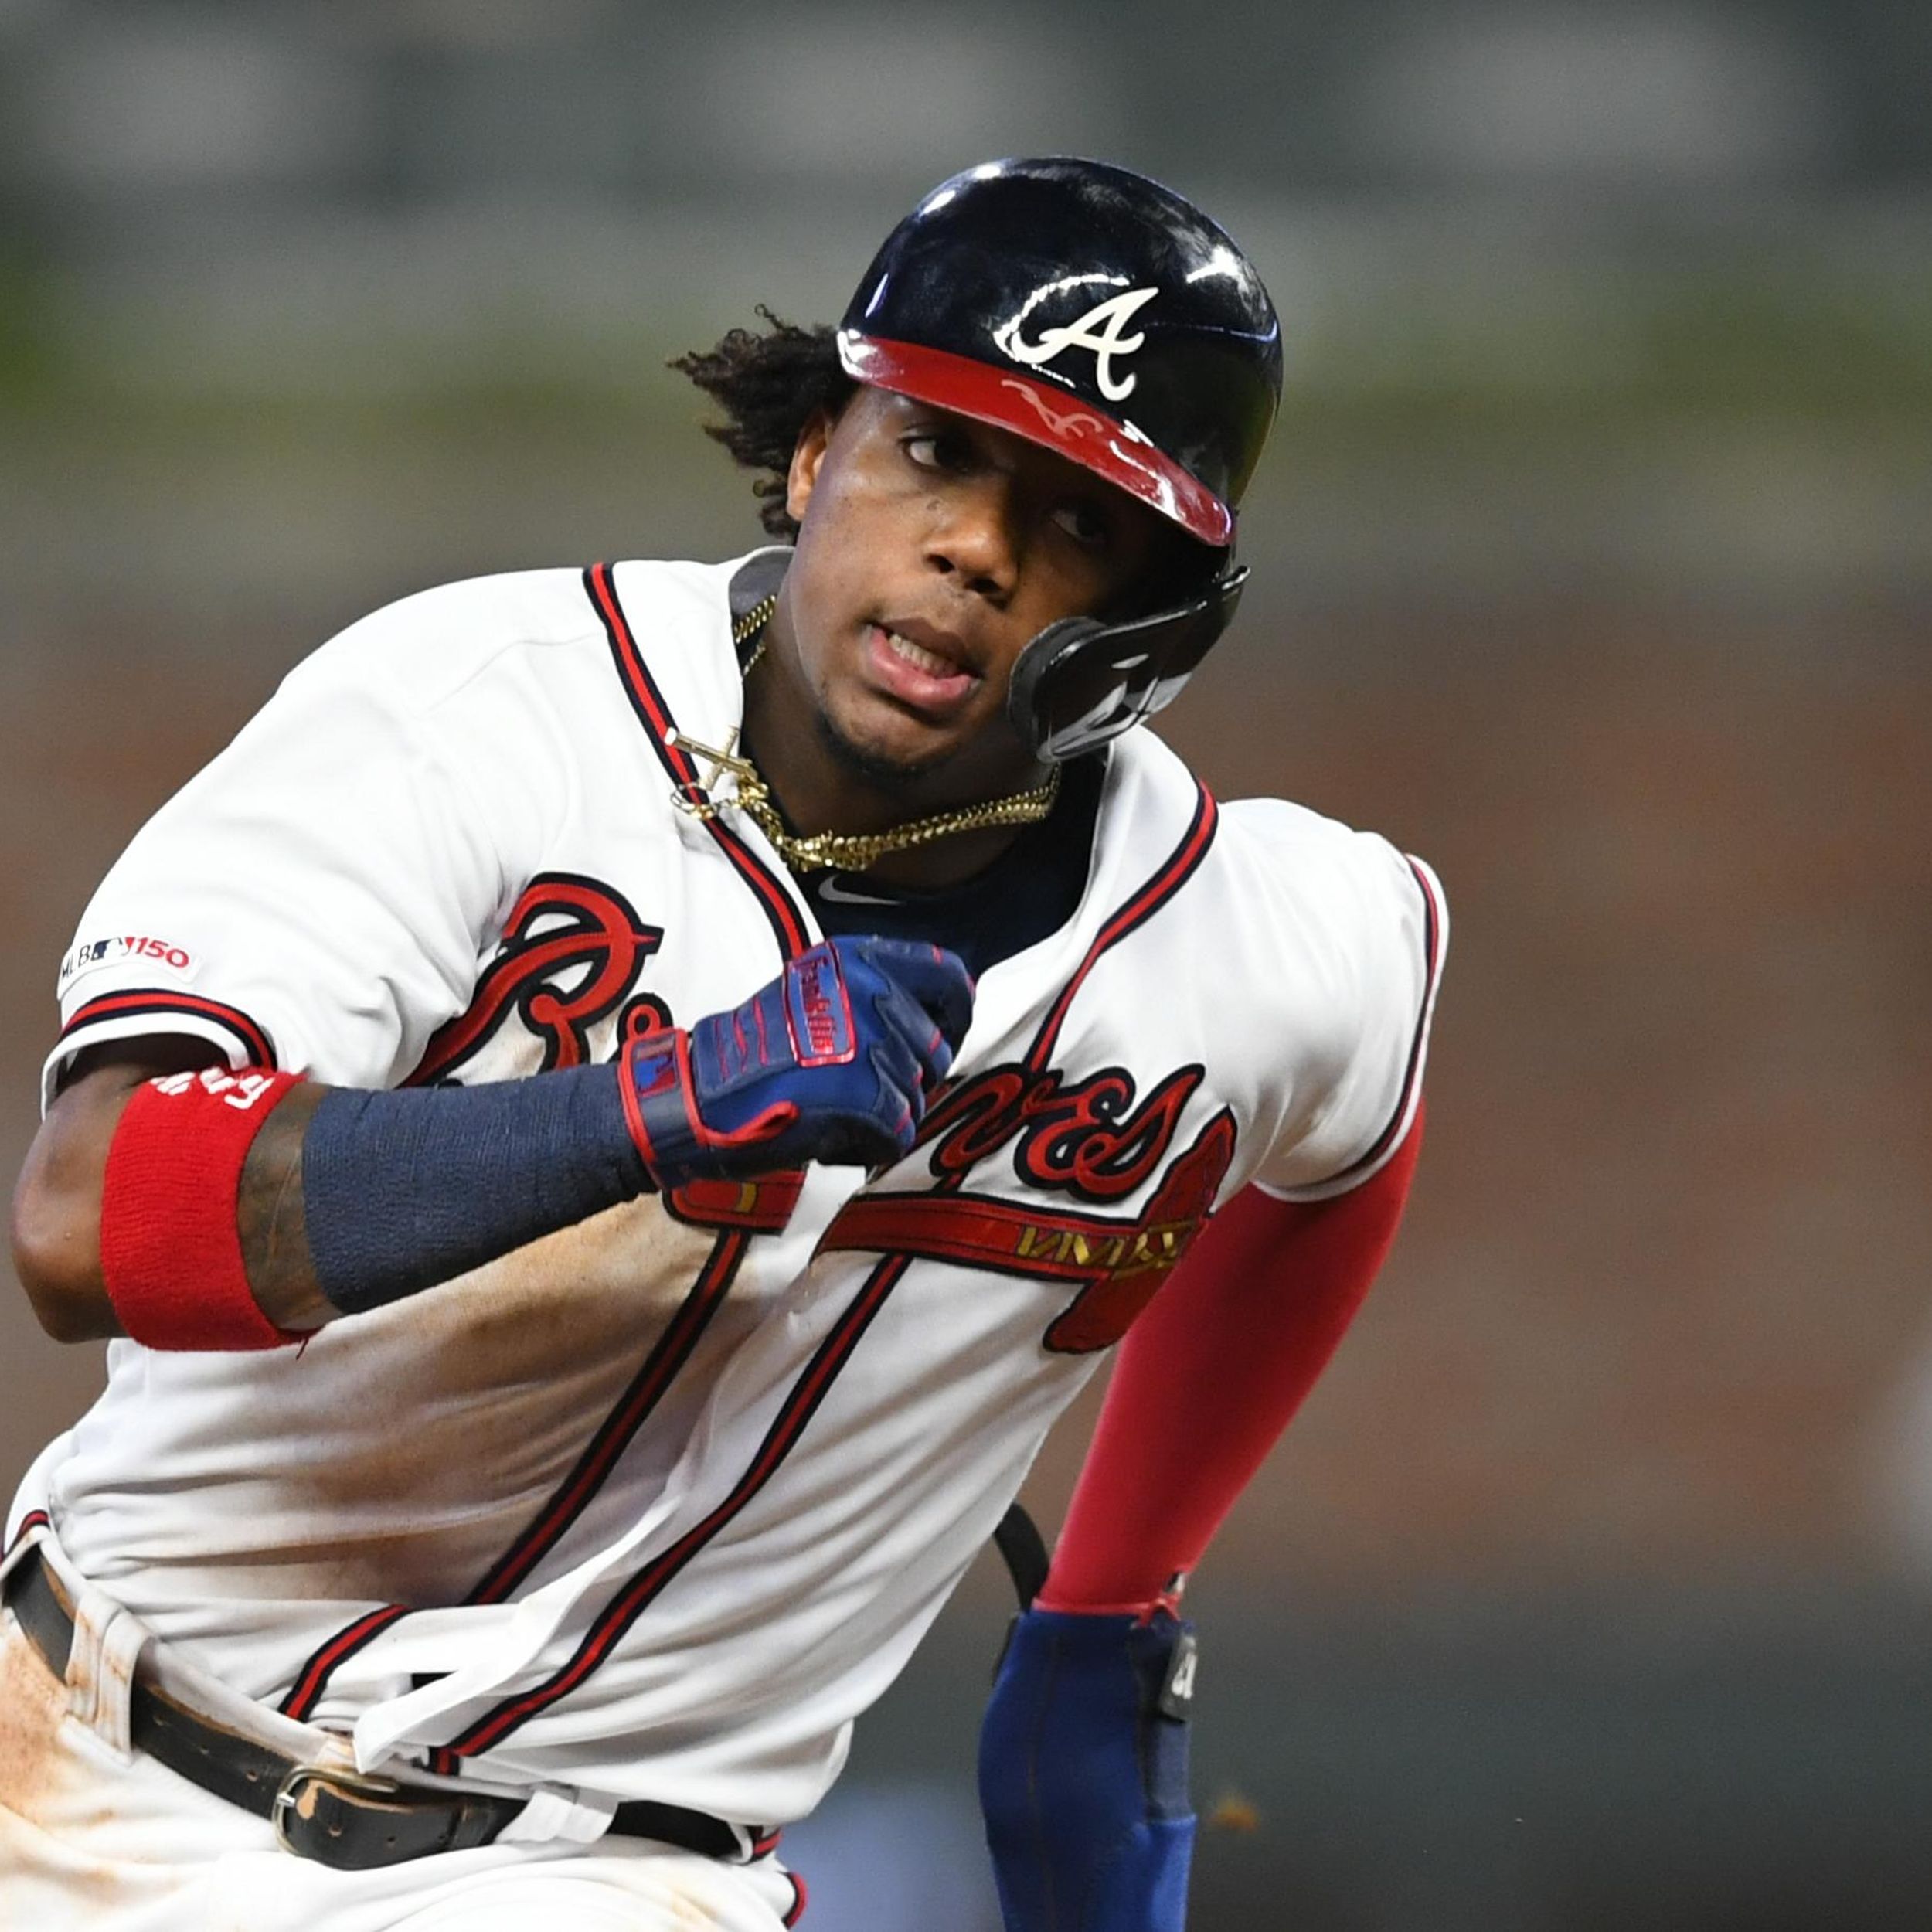 Ronald Acuna Jr. injury update: Braves star to be examined after